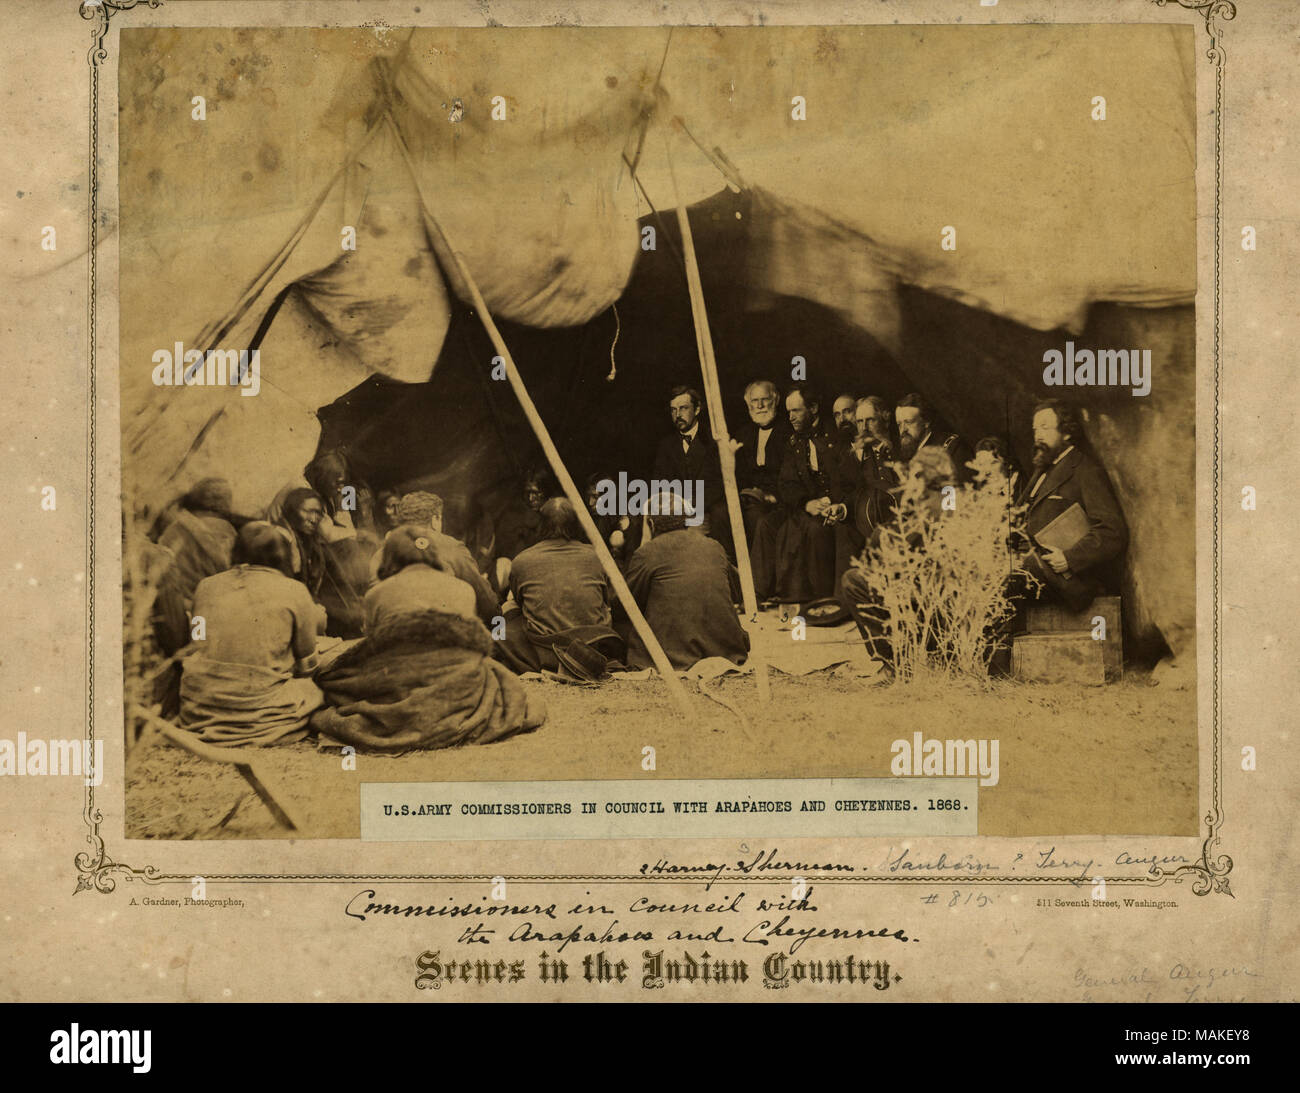 Group of American Indians and United States Army Commissioners in tent structure with wide, staked-up opening; Indians sit on ground at left, and Commissioners at right on boxes. General William S. Harney and General William T. Sherman are among the Commissioners. Harney first served under Andrew Jackson in 1818 as a second lieutenant. He was sent to Nebraska Country to fight the Sioux after what is called the Grattan Massacre. His battles against the Sioux became known as the 'Battle of Ash Hollow.' After the Sioux were defeated they referred to Harney as the 'Woman Killer.' Sherman first ser Stock Photo